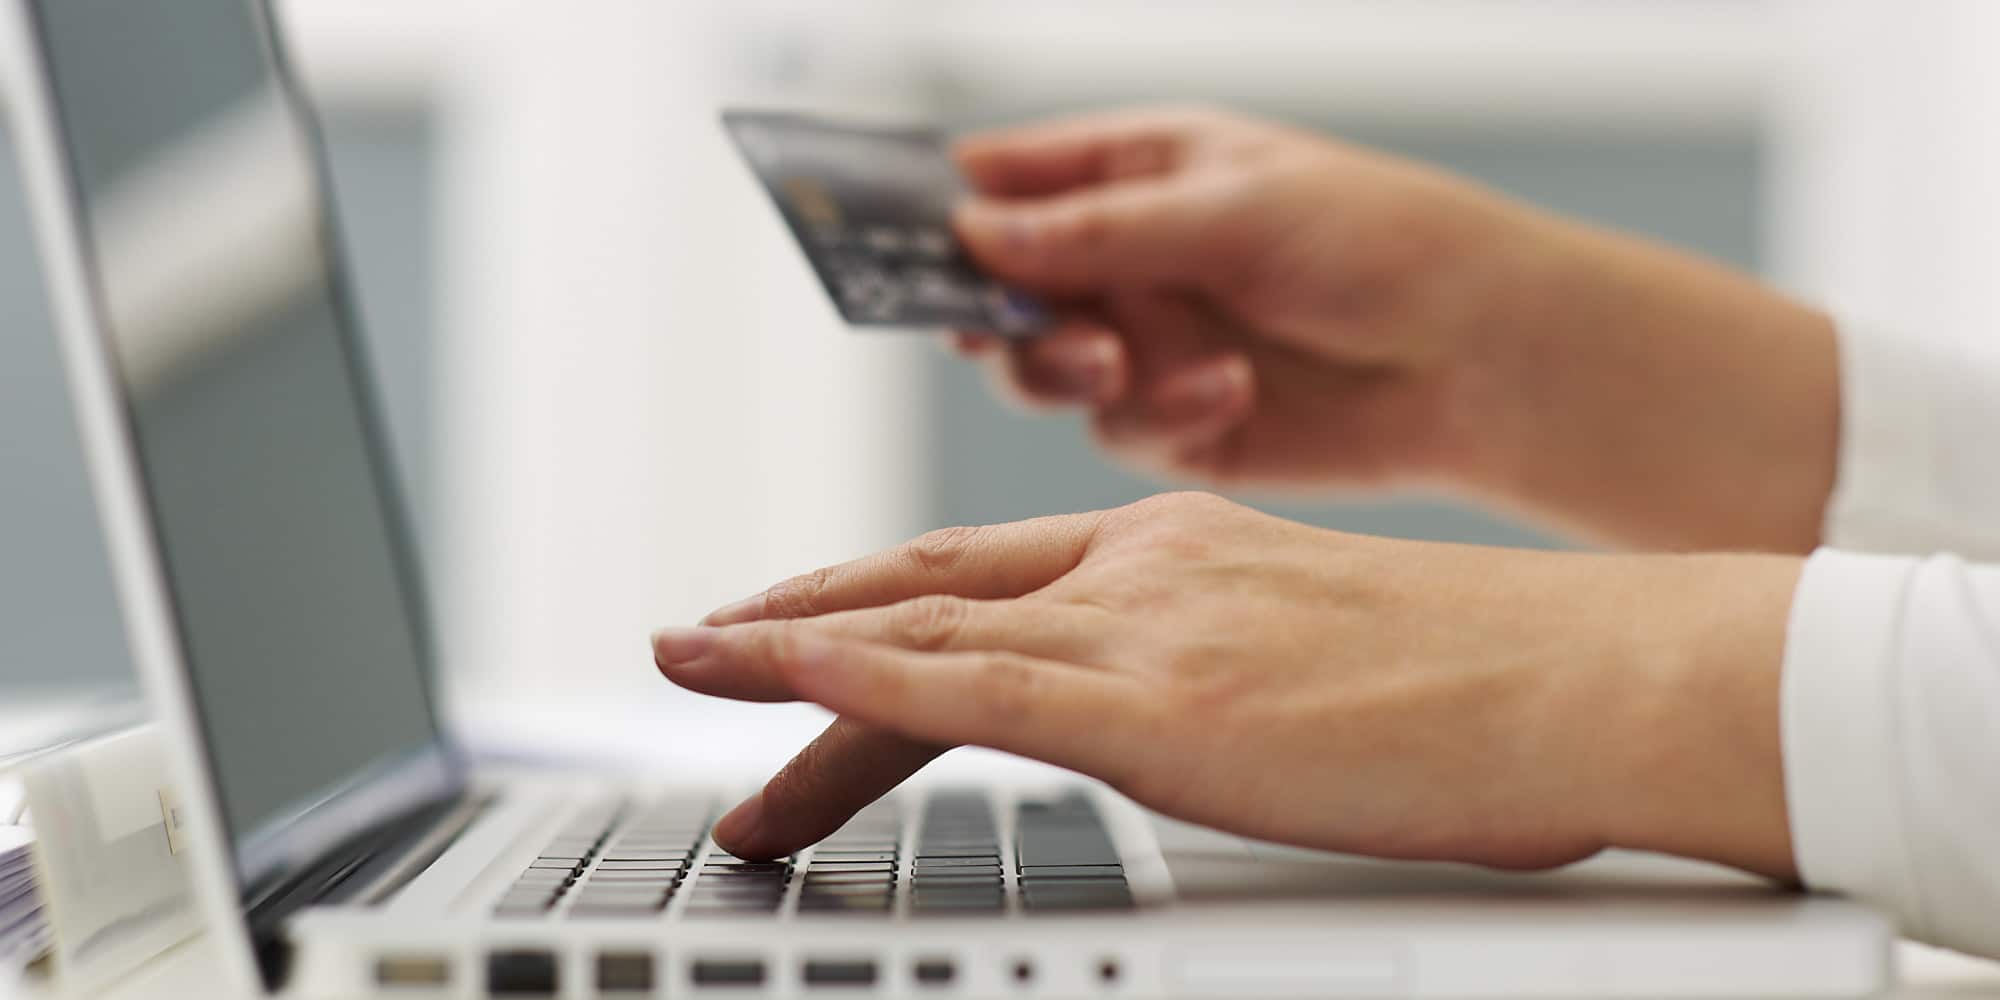 Shopping Online with a Credit Card